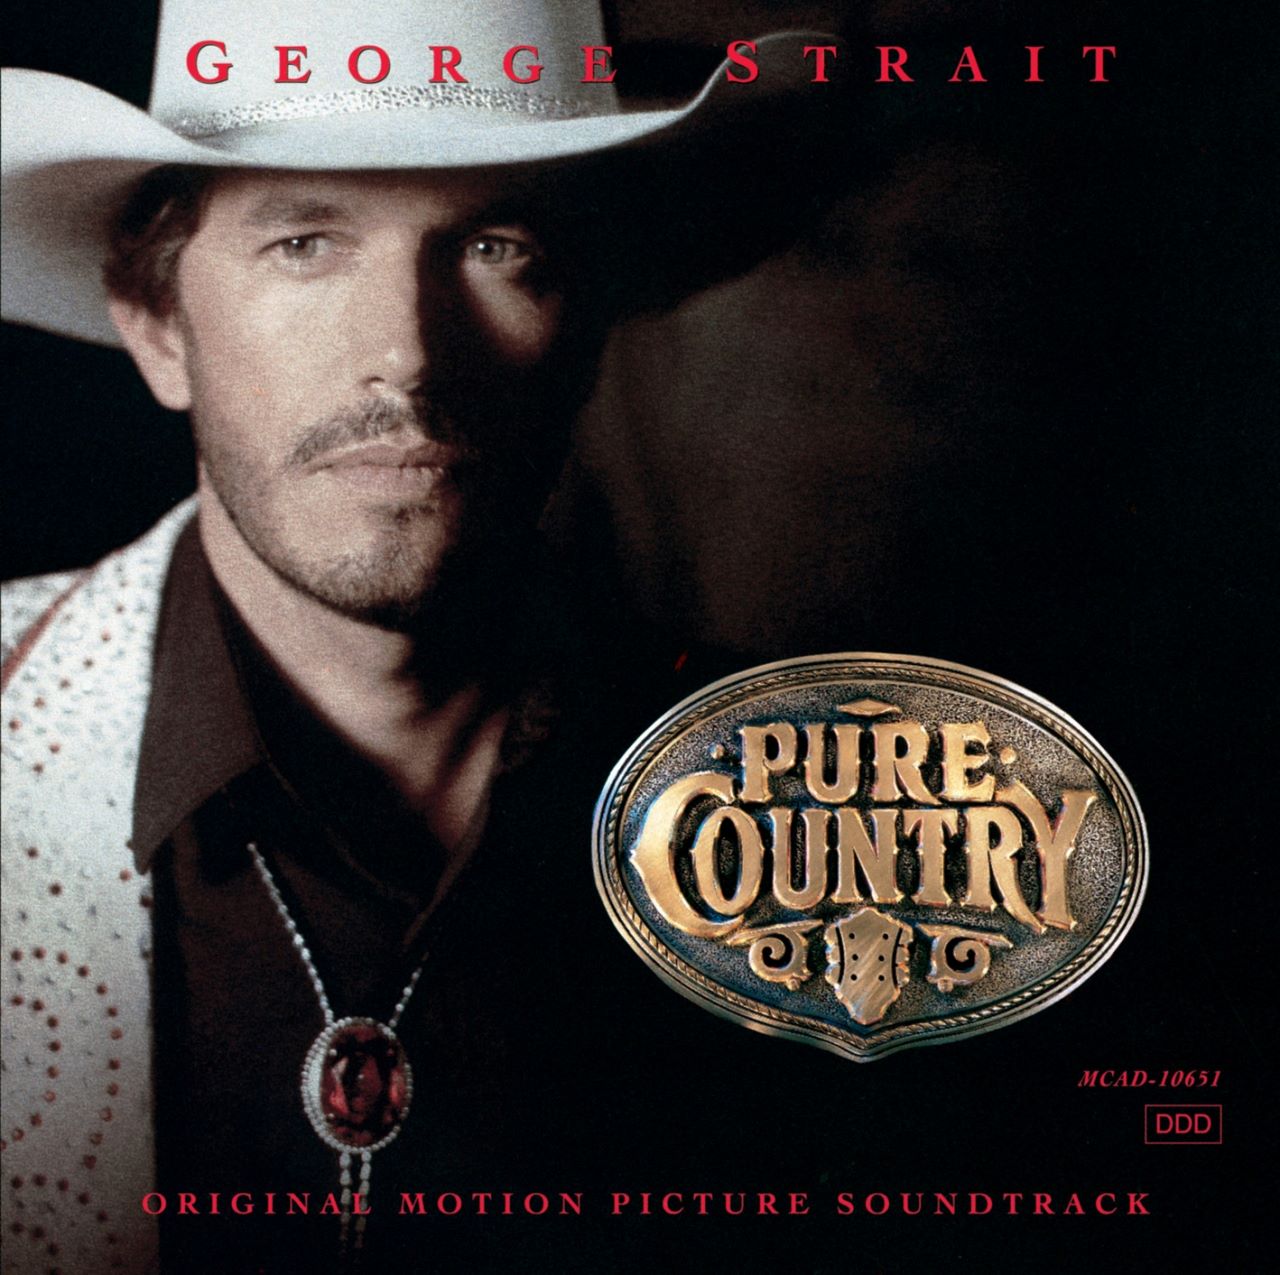 George Strait – Pure Country cover album